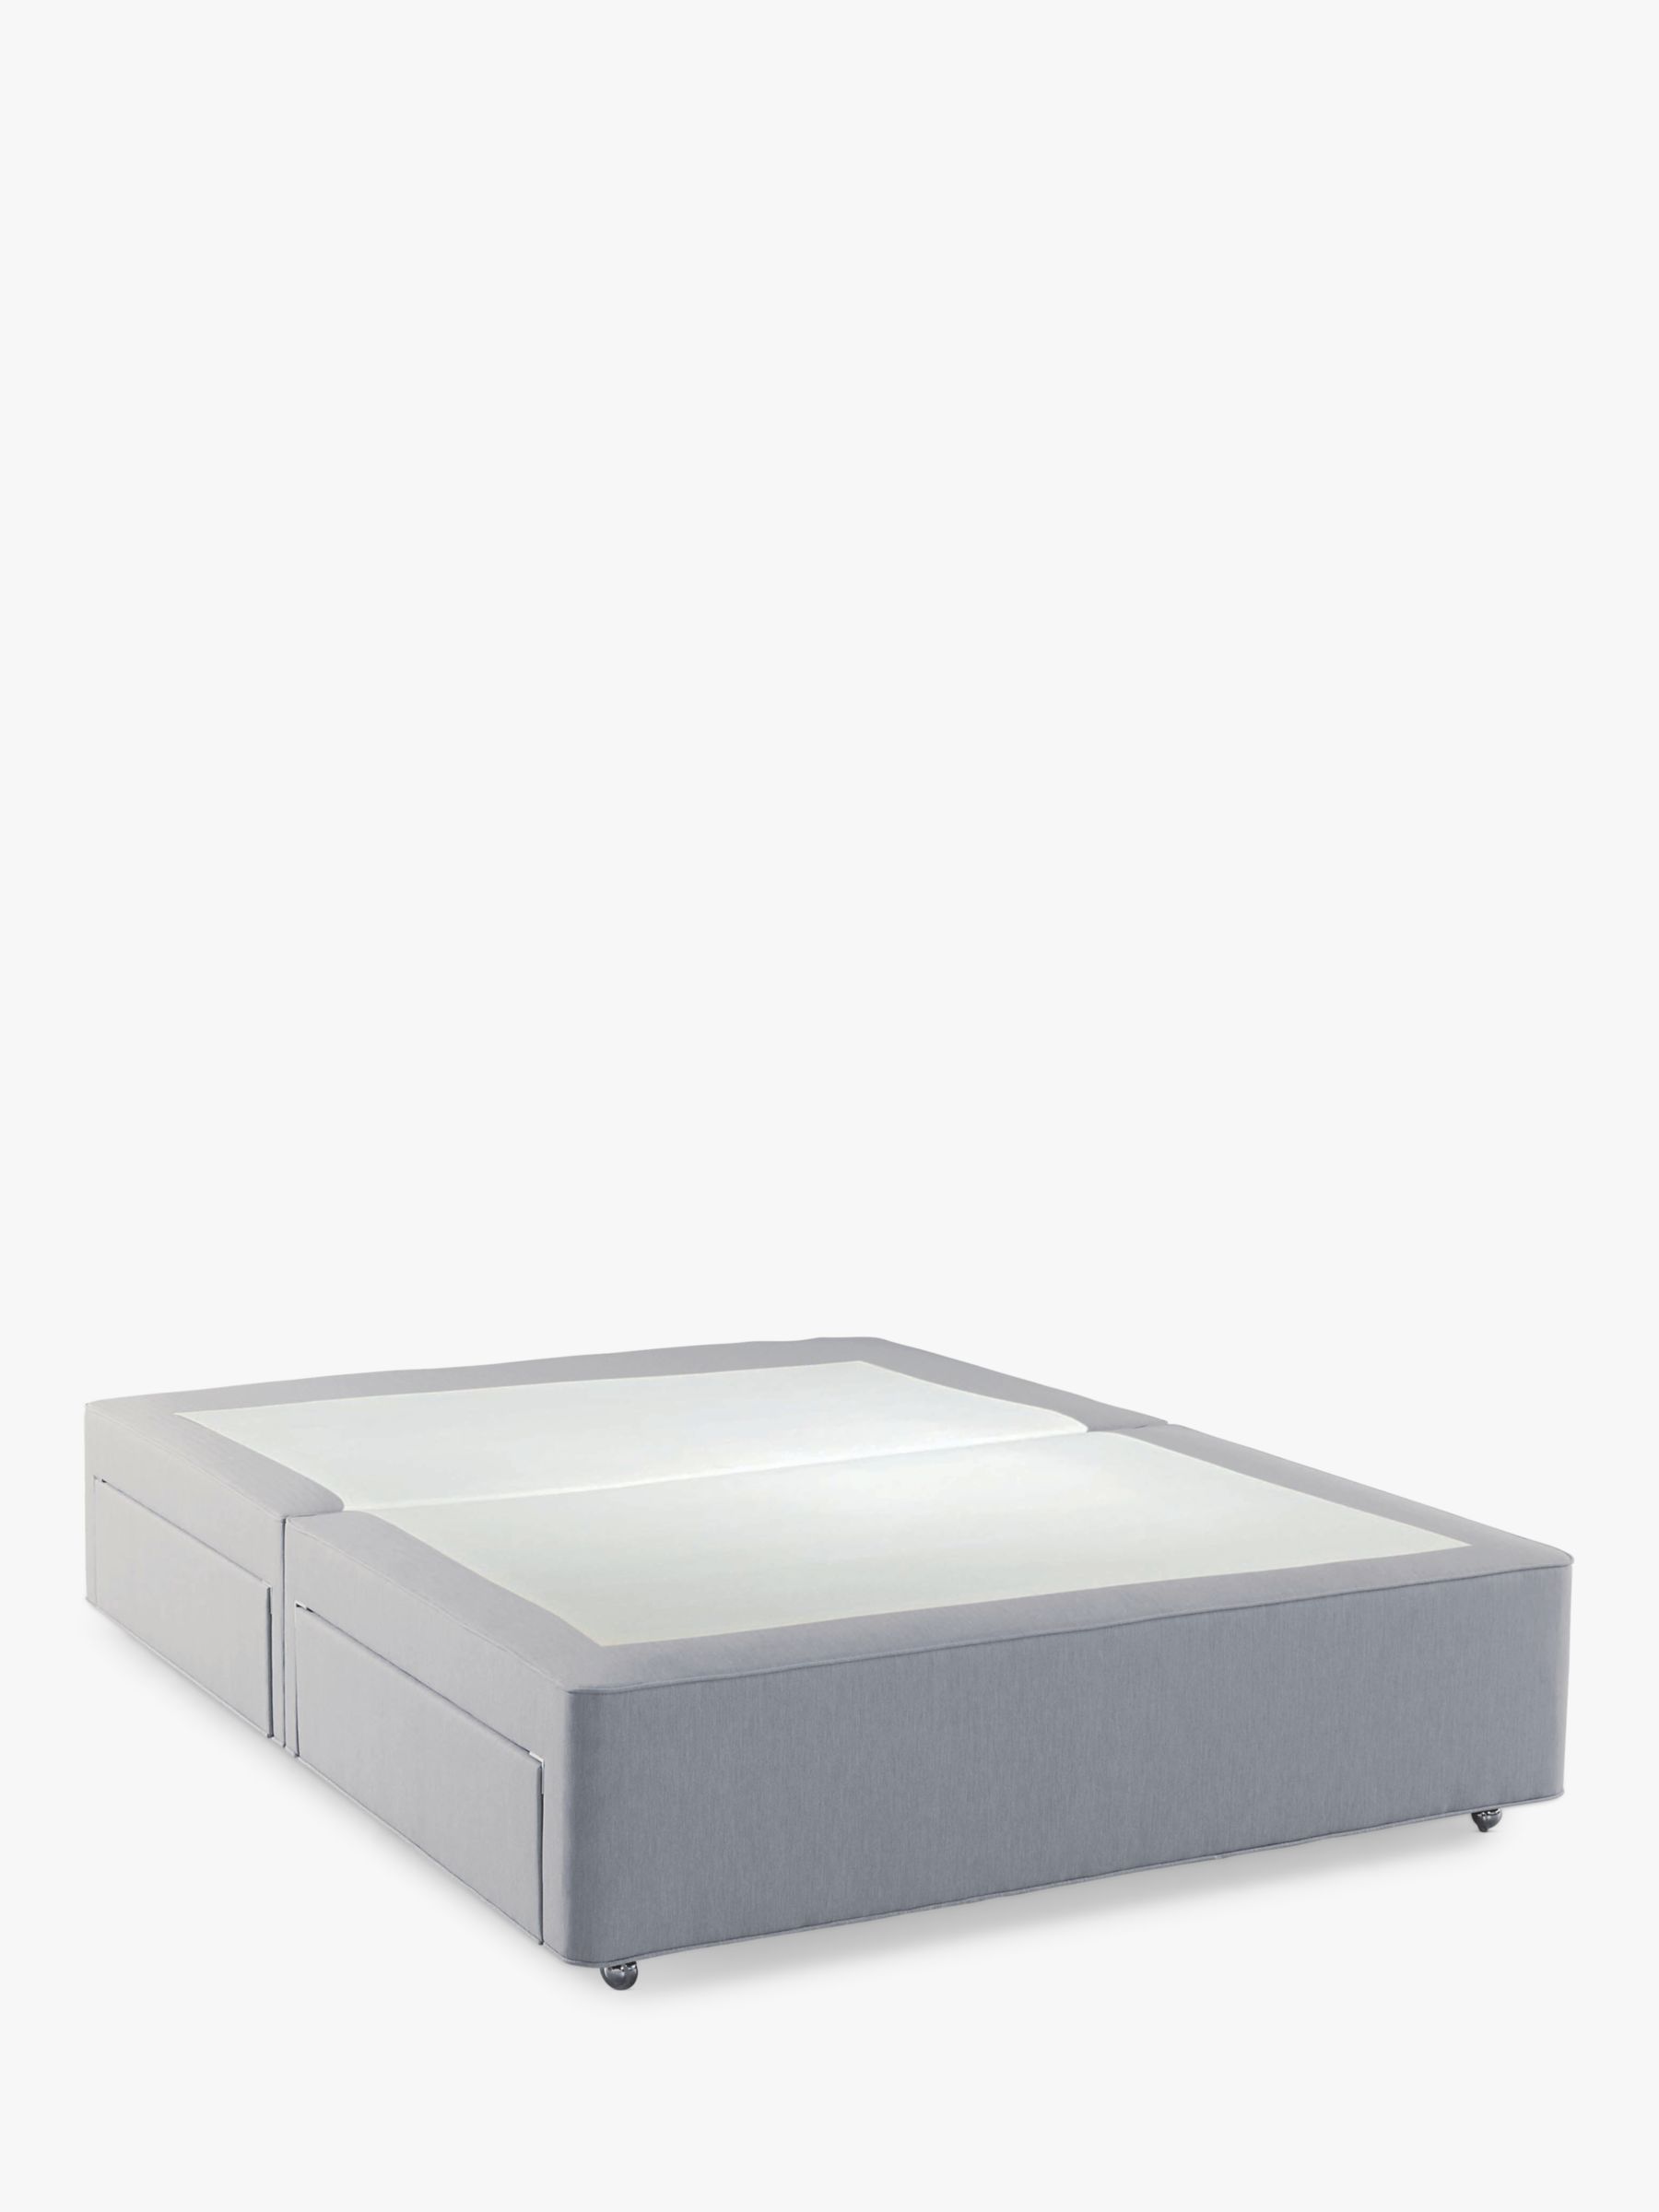 Photo of Hypnos firm edge 4 drawer divan storage bed king size